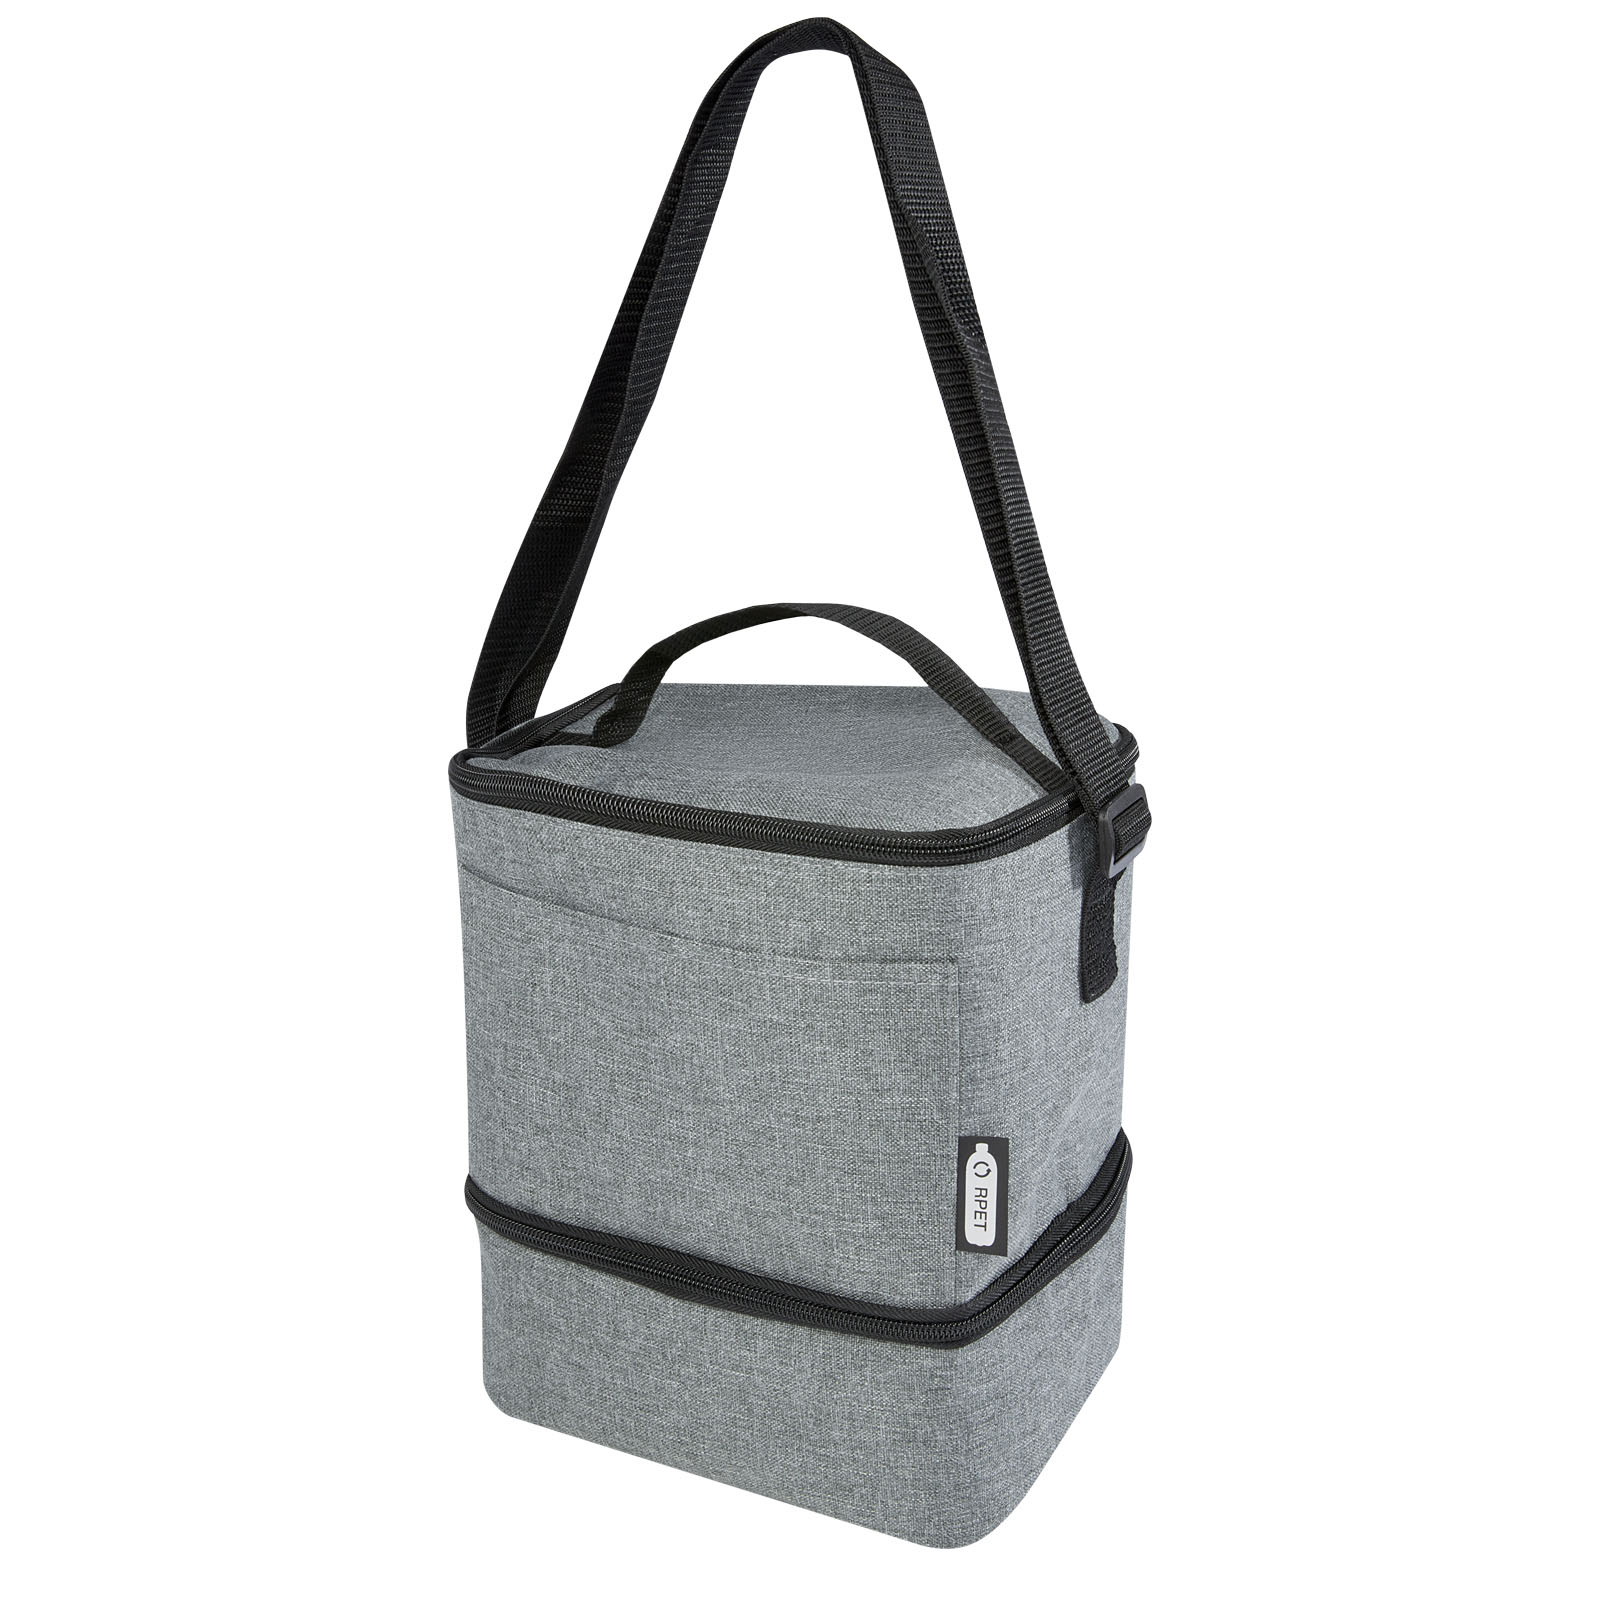 Cooler bags - Tundra 9-can GRS RPET lunch cooler bag 7L